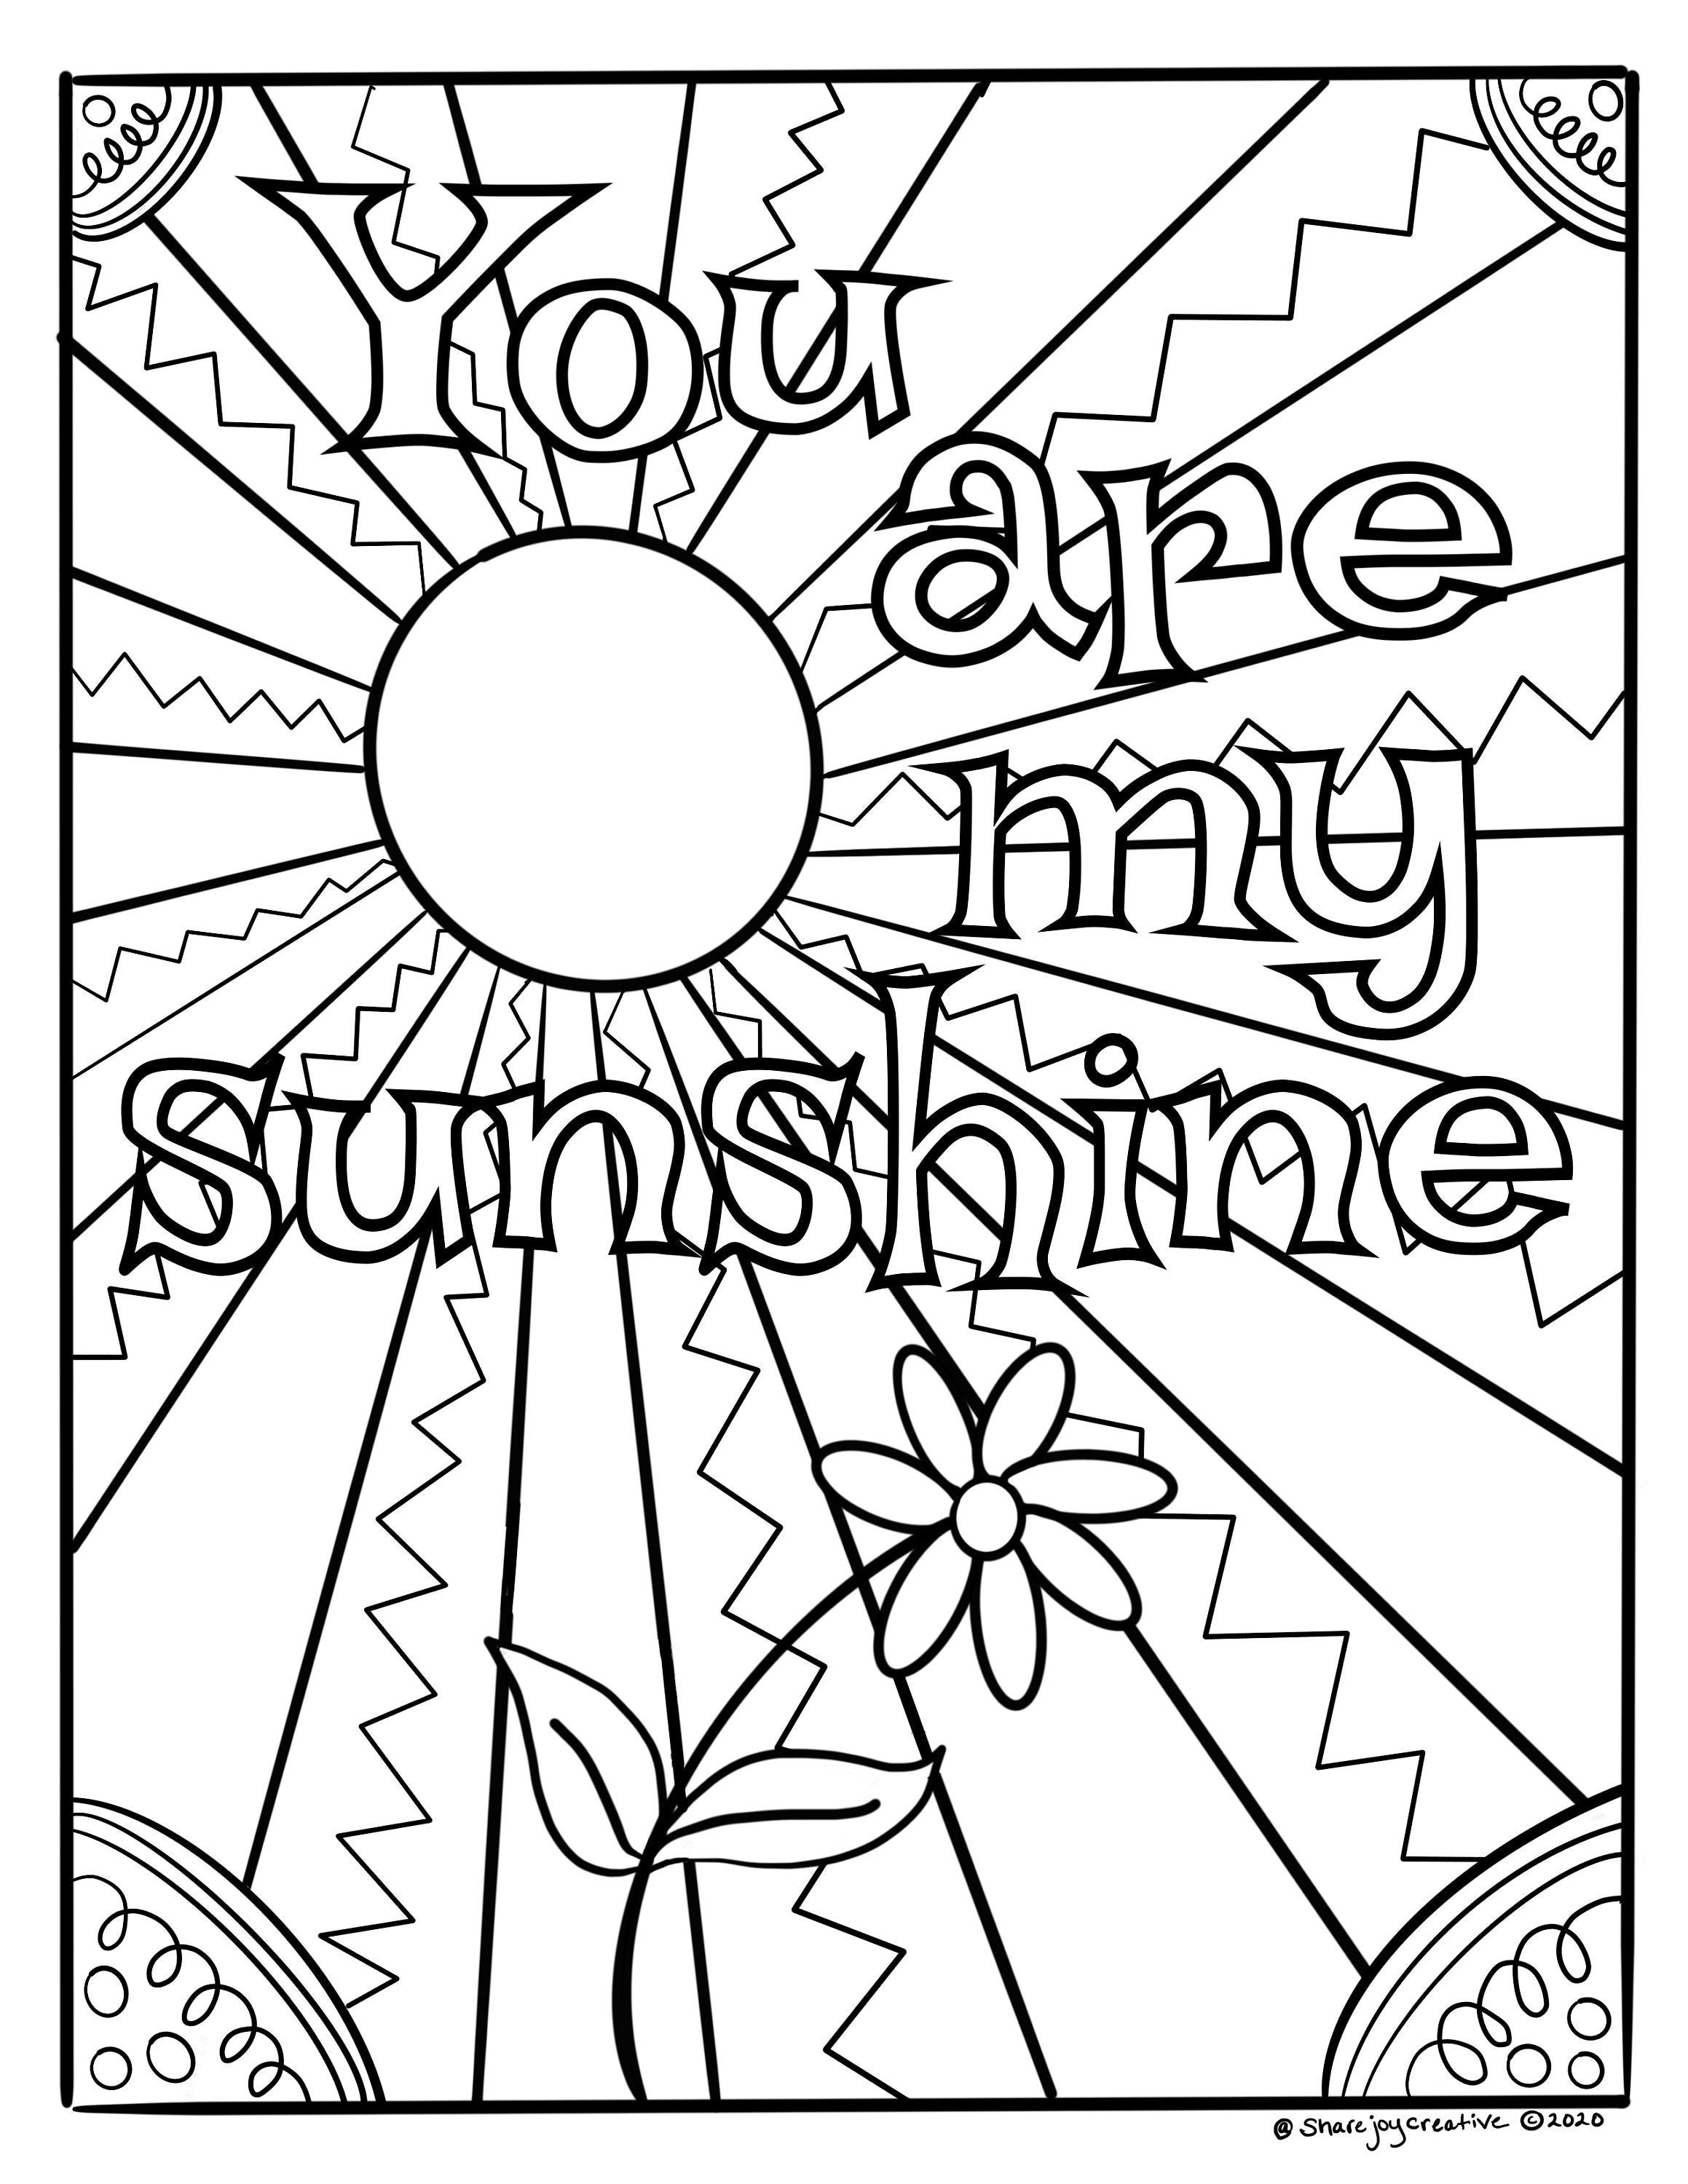 you-are-my-sunshine-coloring-page-digital-download-etsy-uk